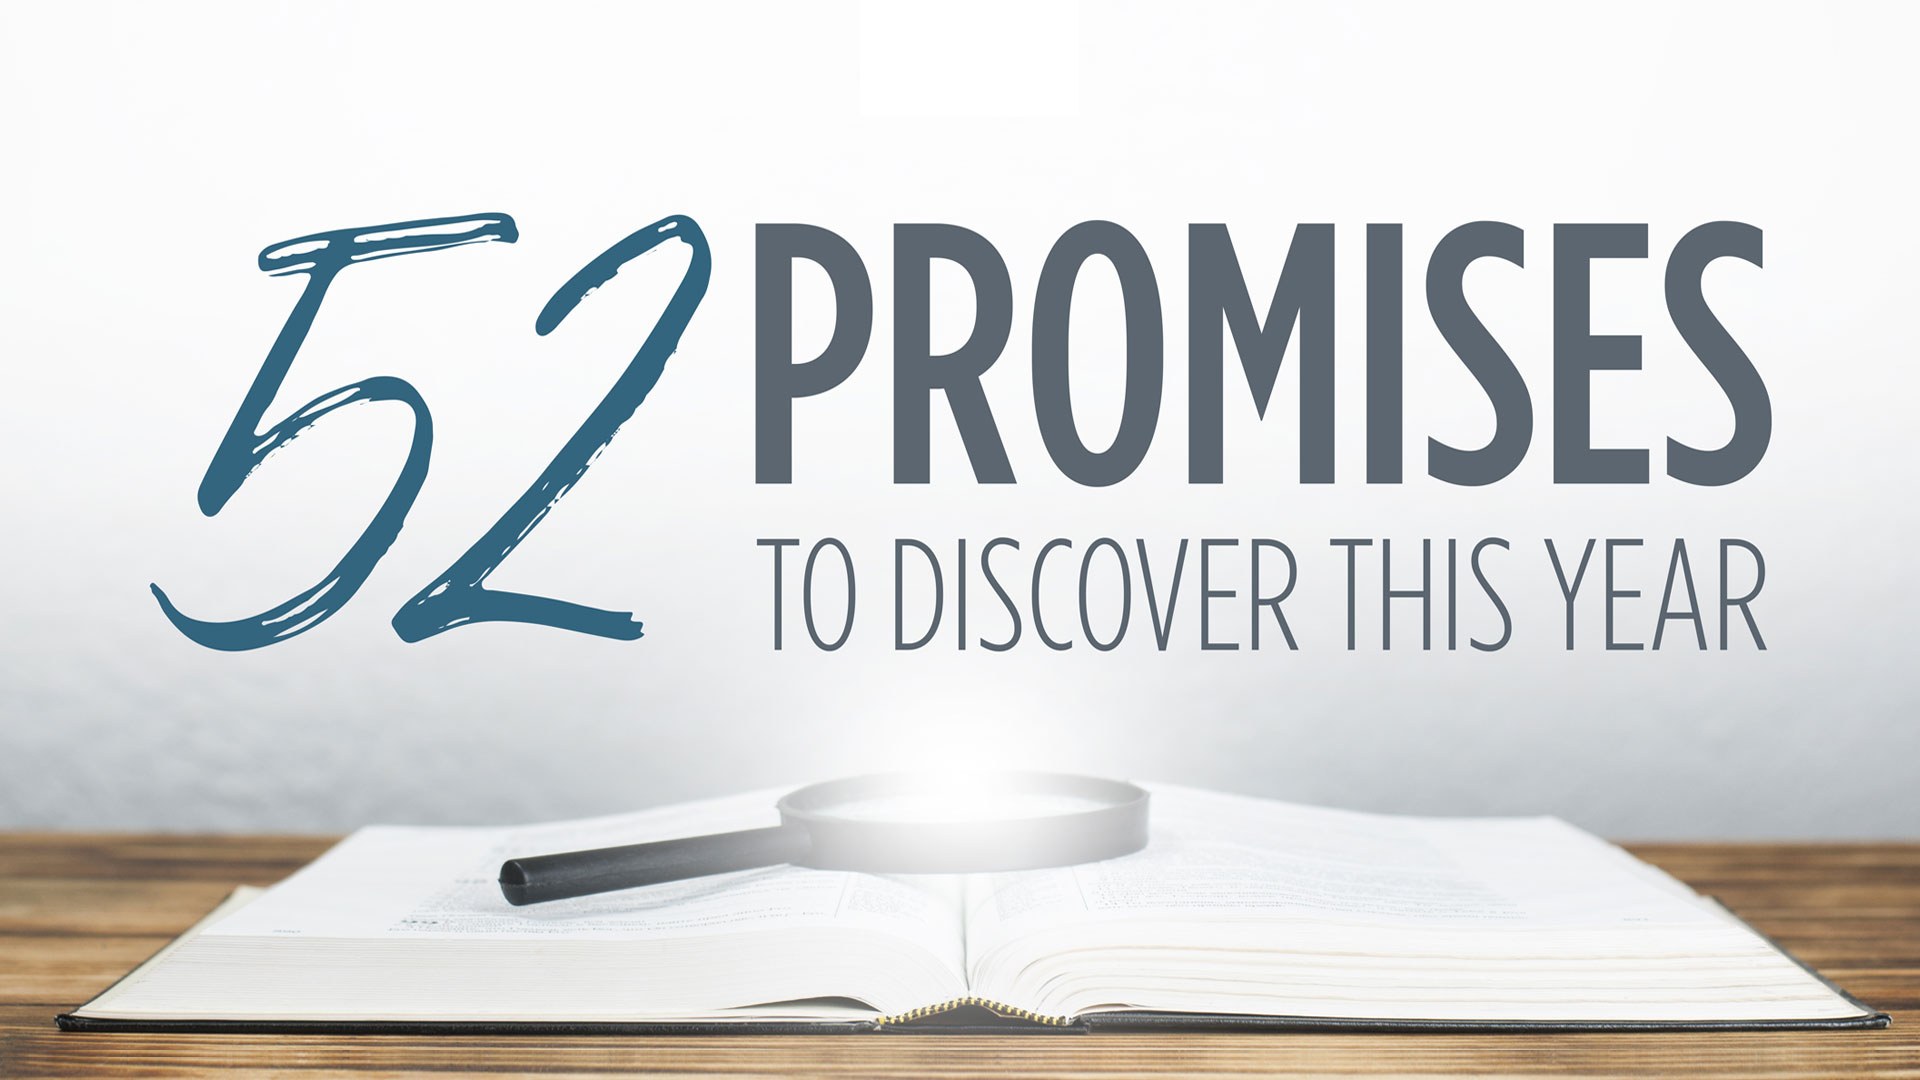 52 Promises to Discover This Year 1920x1080